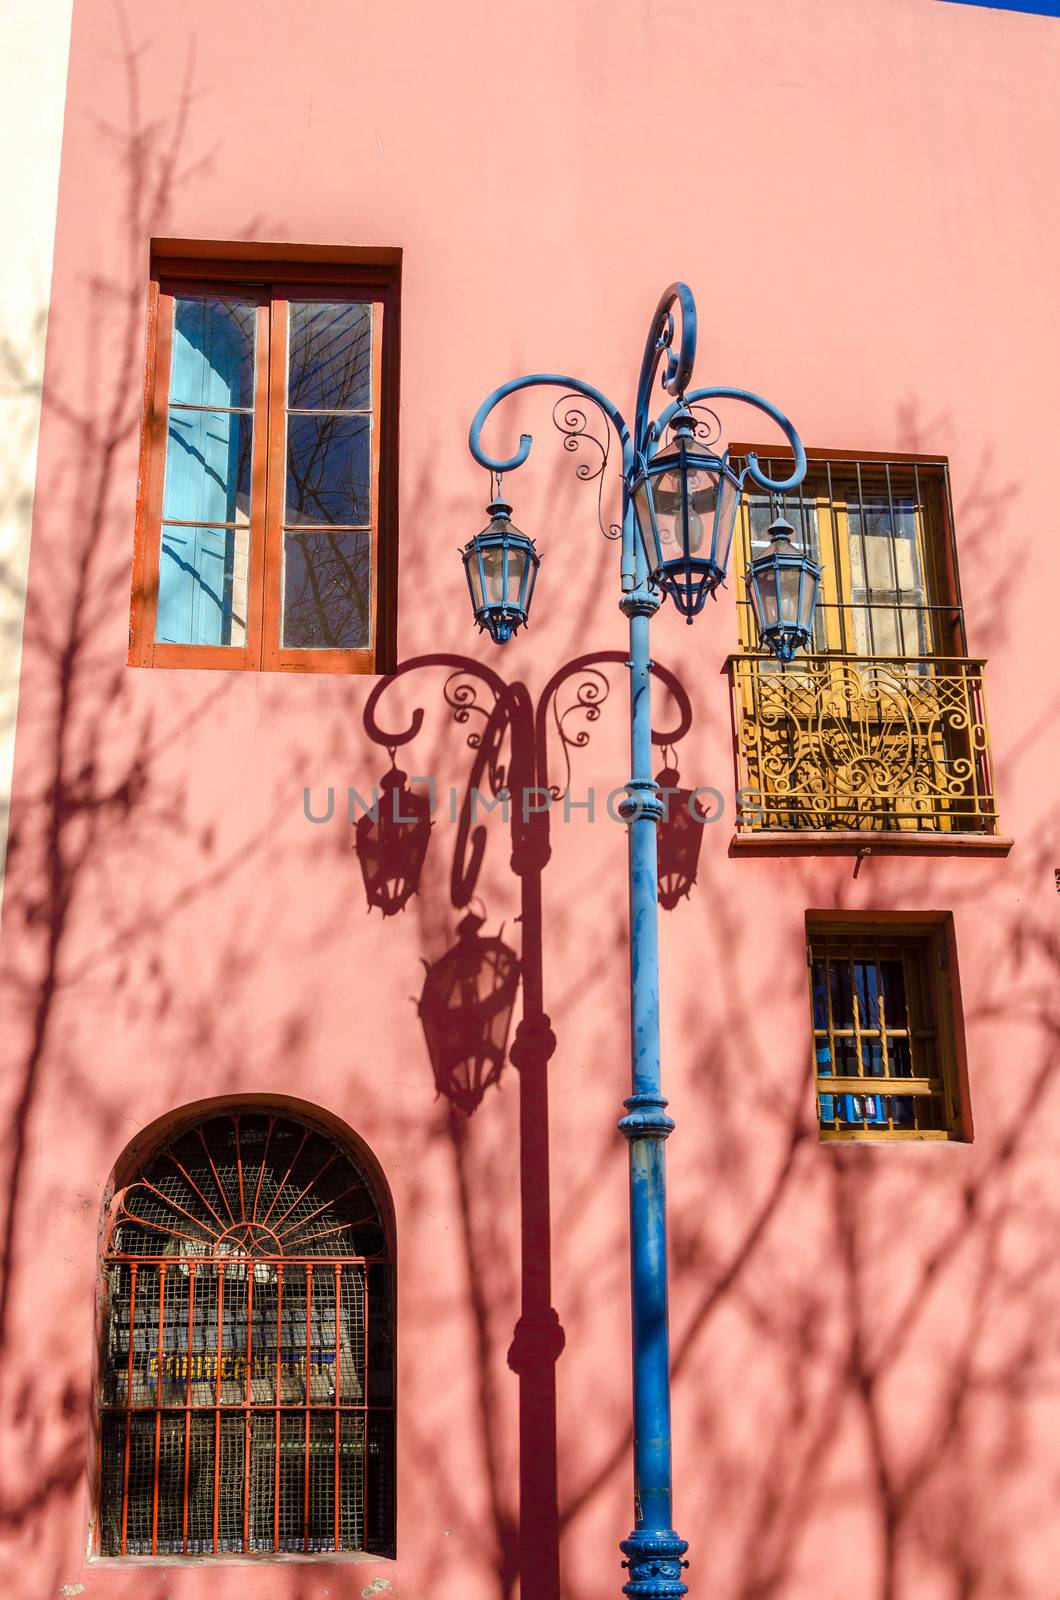 Streetlight and Pink Wall by jkraft5